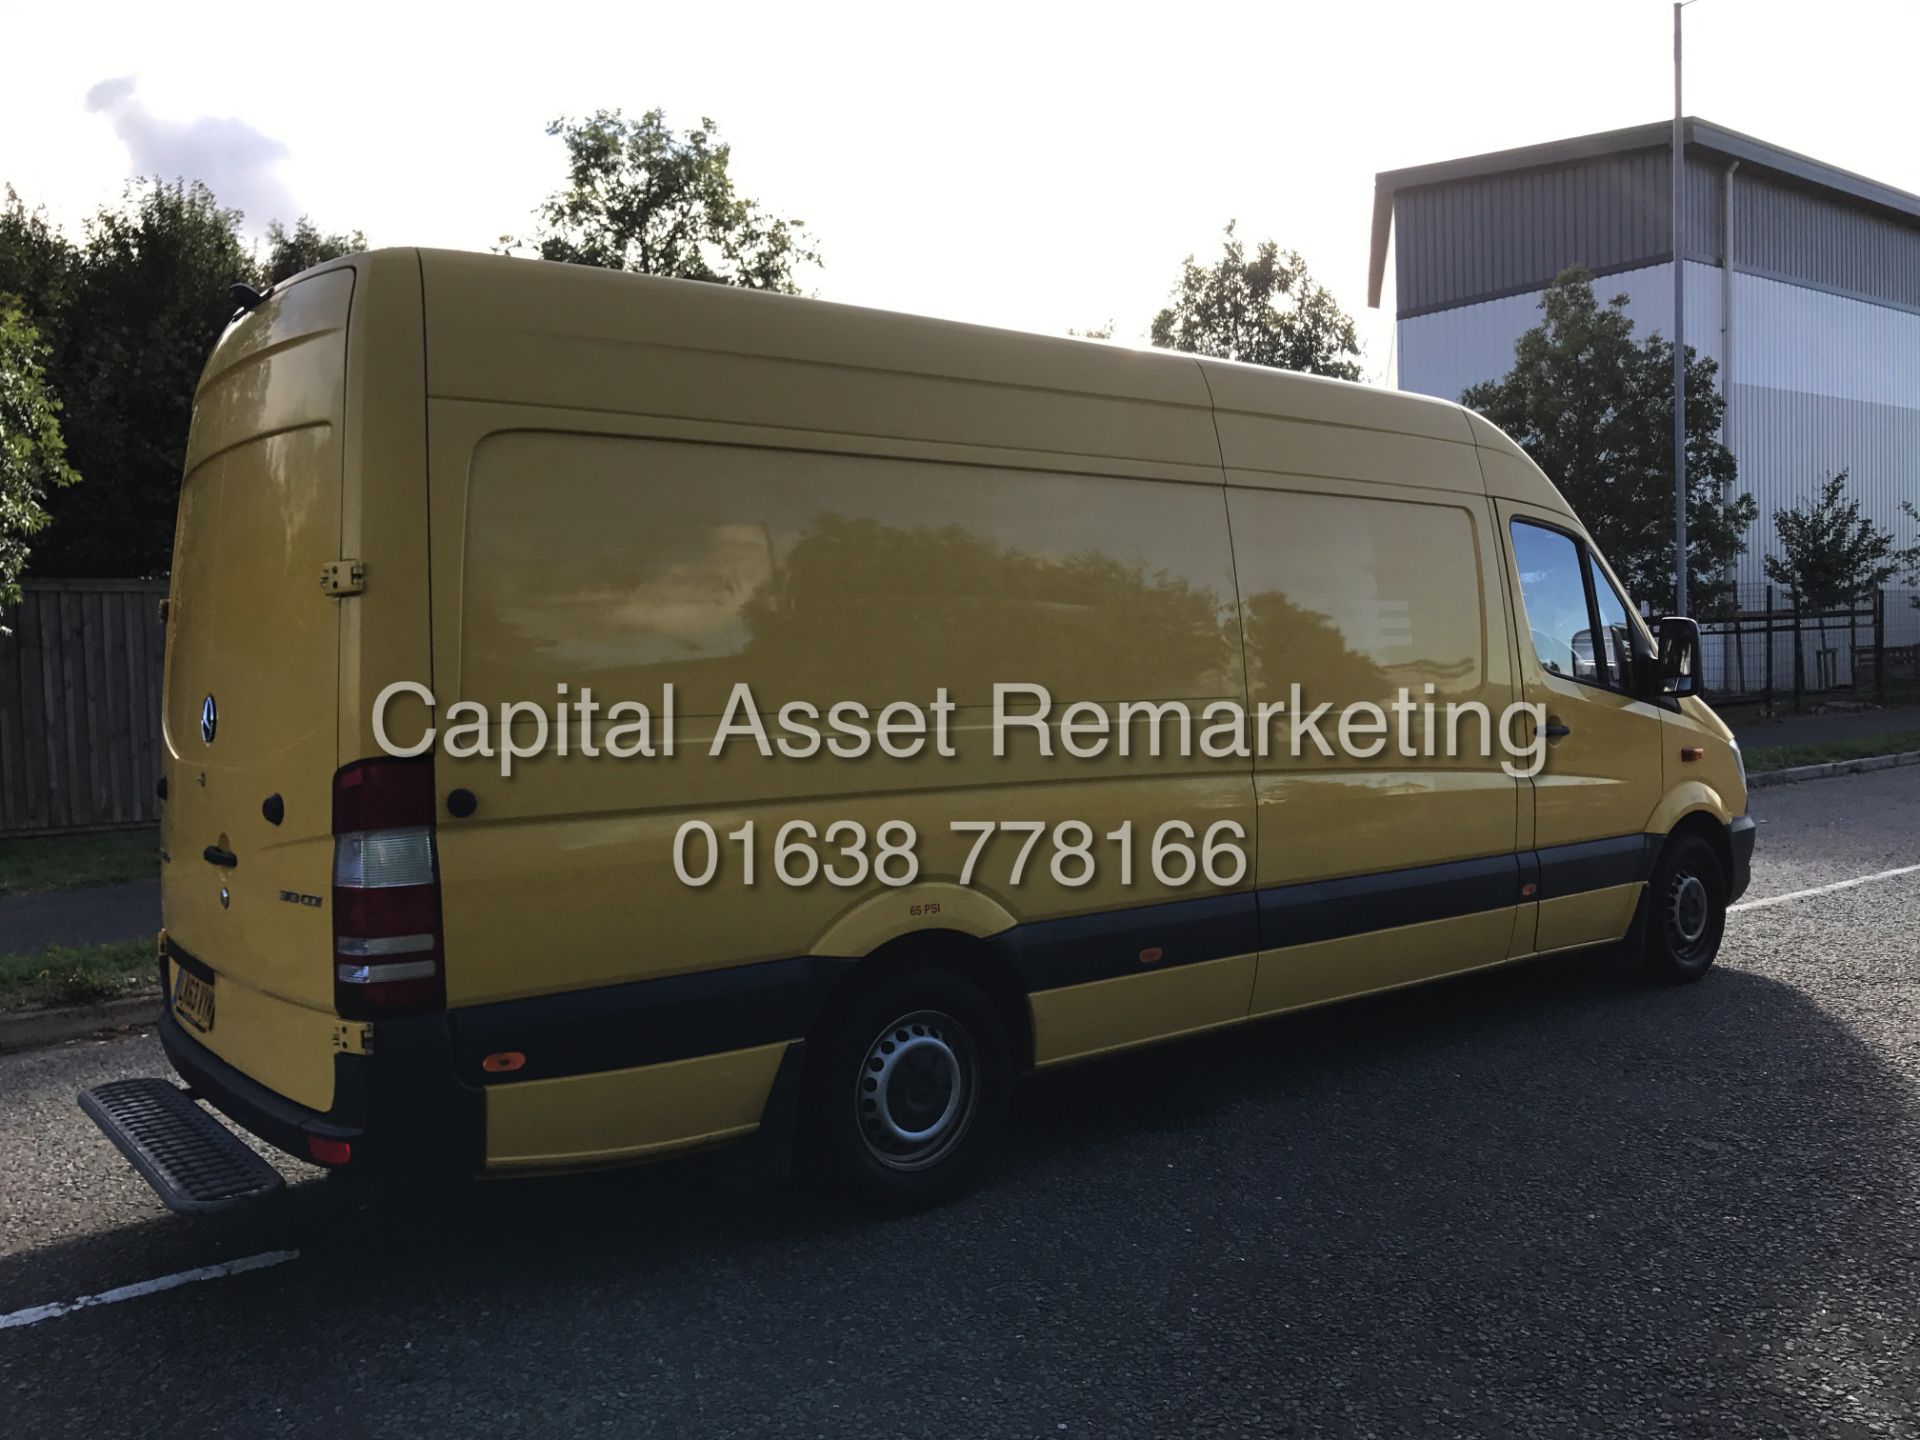 MERCEDES SPRINTER 313CDI LONG WHEEL BASE HIGH ROOF - AIR CON - 1 OWNER - 2014 REG - IDEAL CAMPER!!! - Image 8 of 12